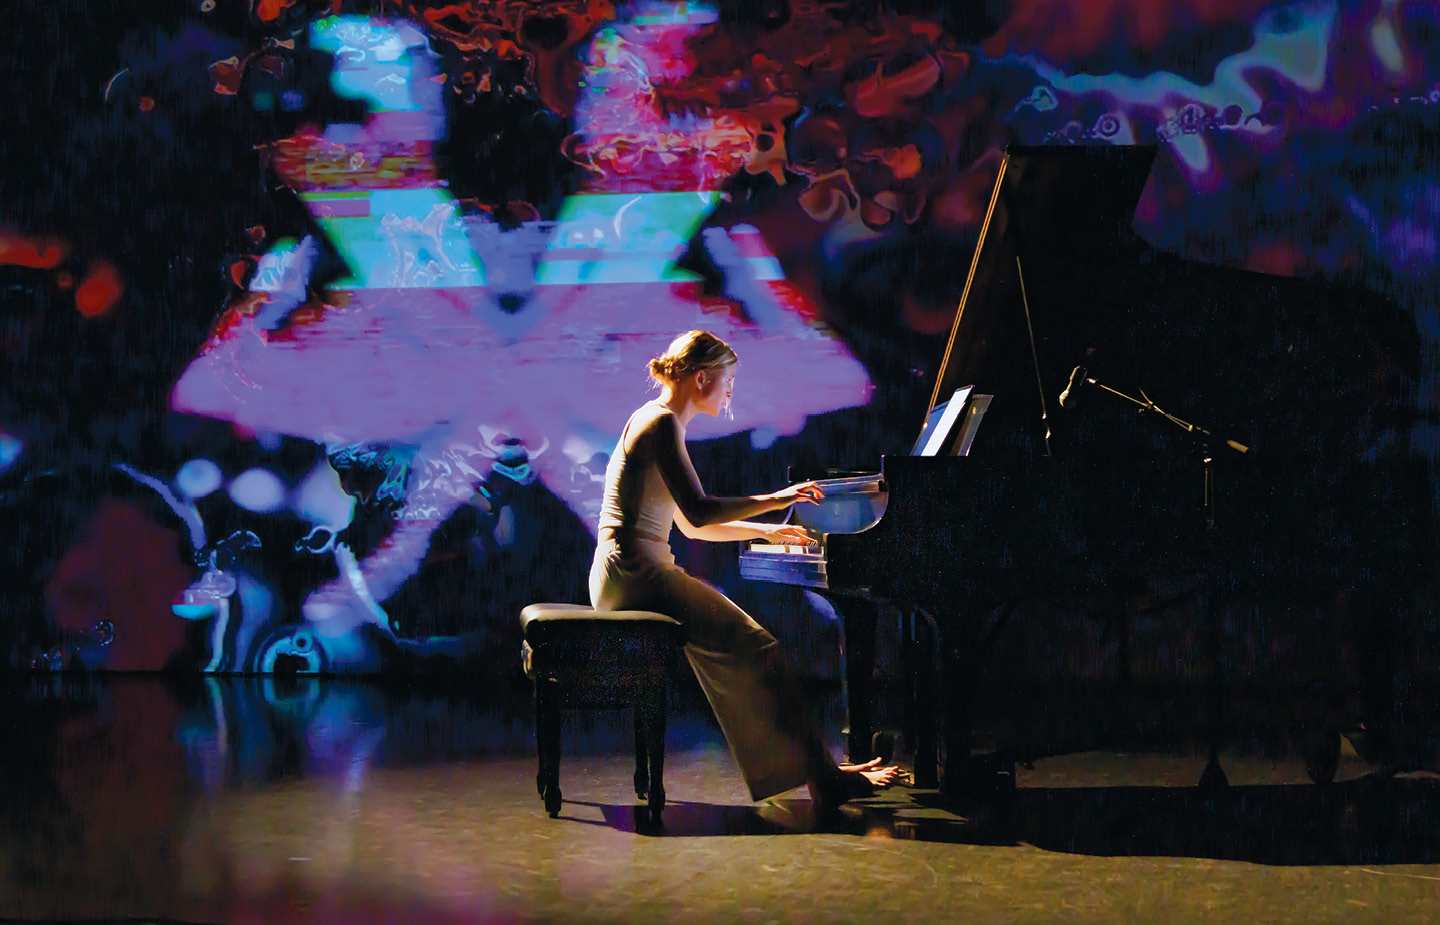 Student playing piano with colored lights in background